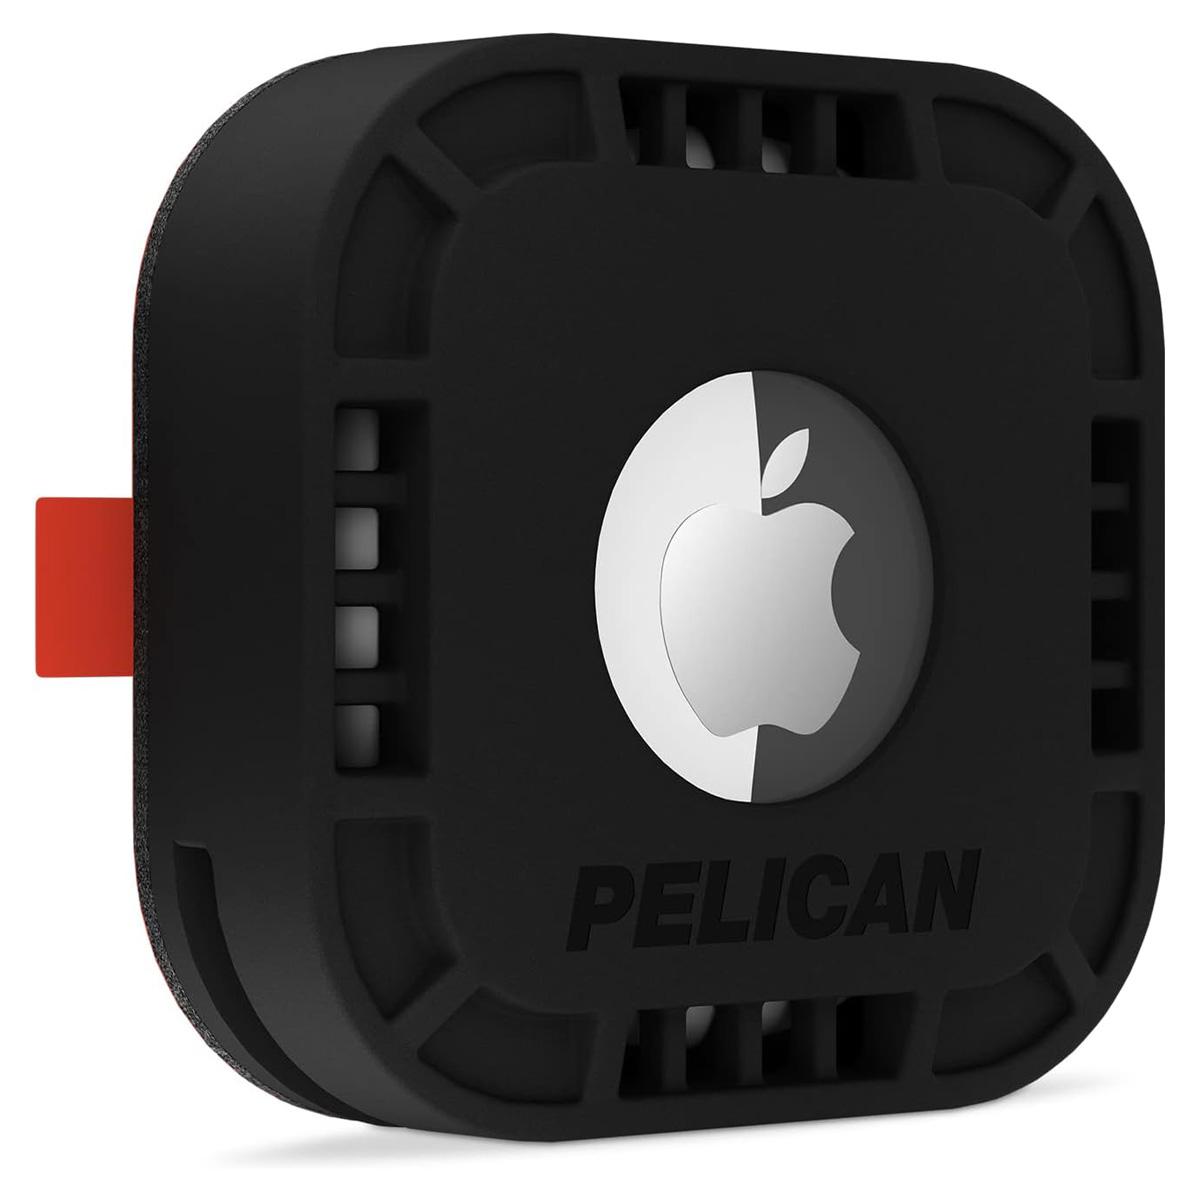 Apple Airtag Pelican Protector Holder Case Cover for $1.99